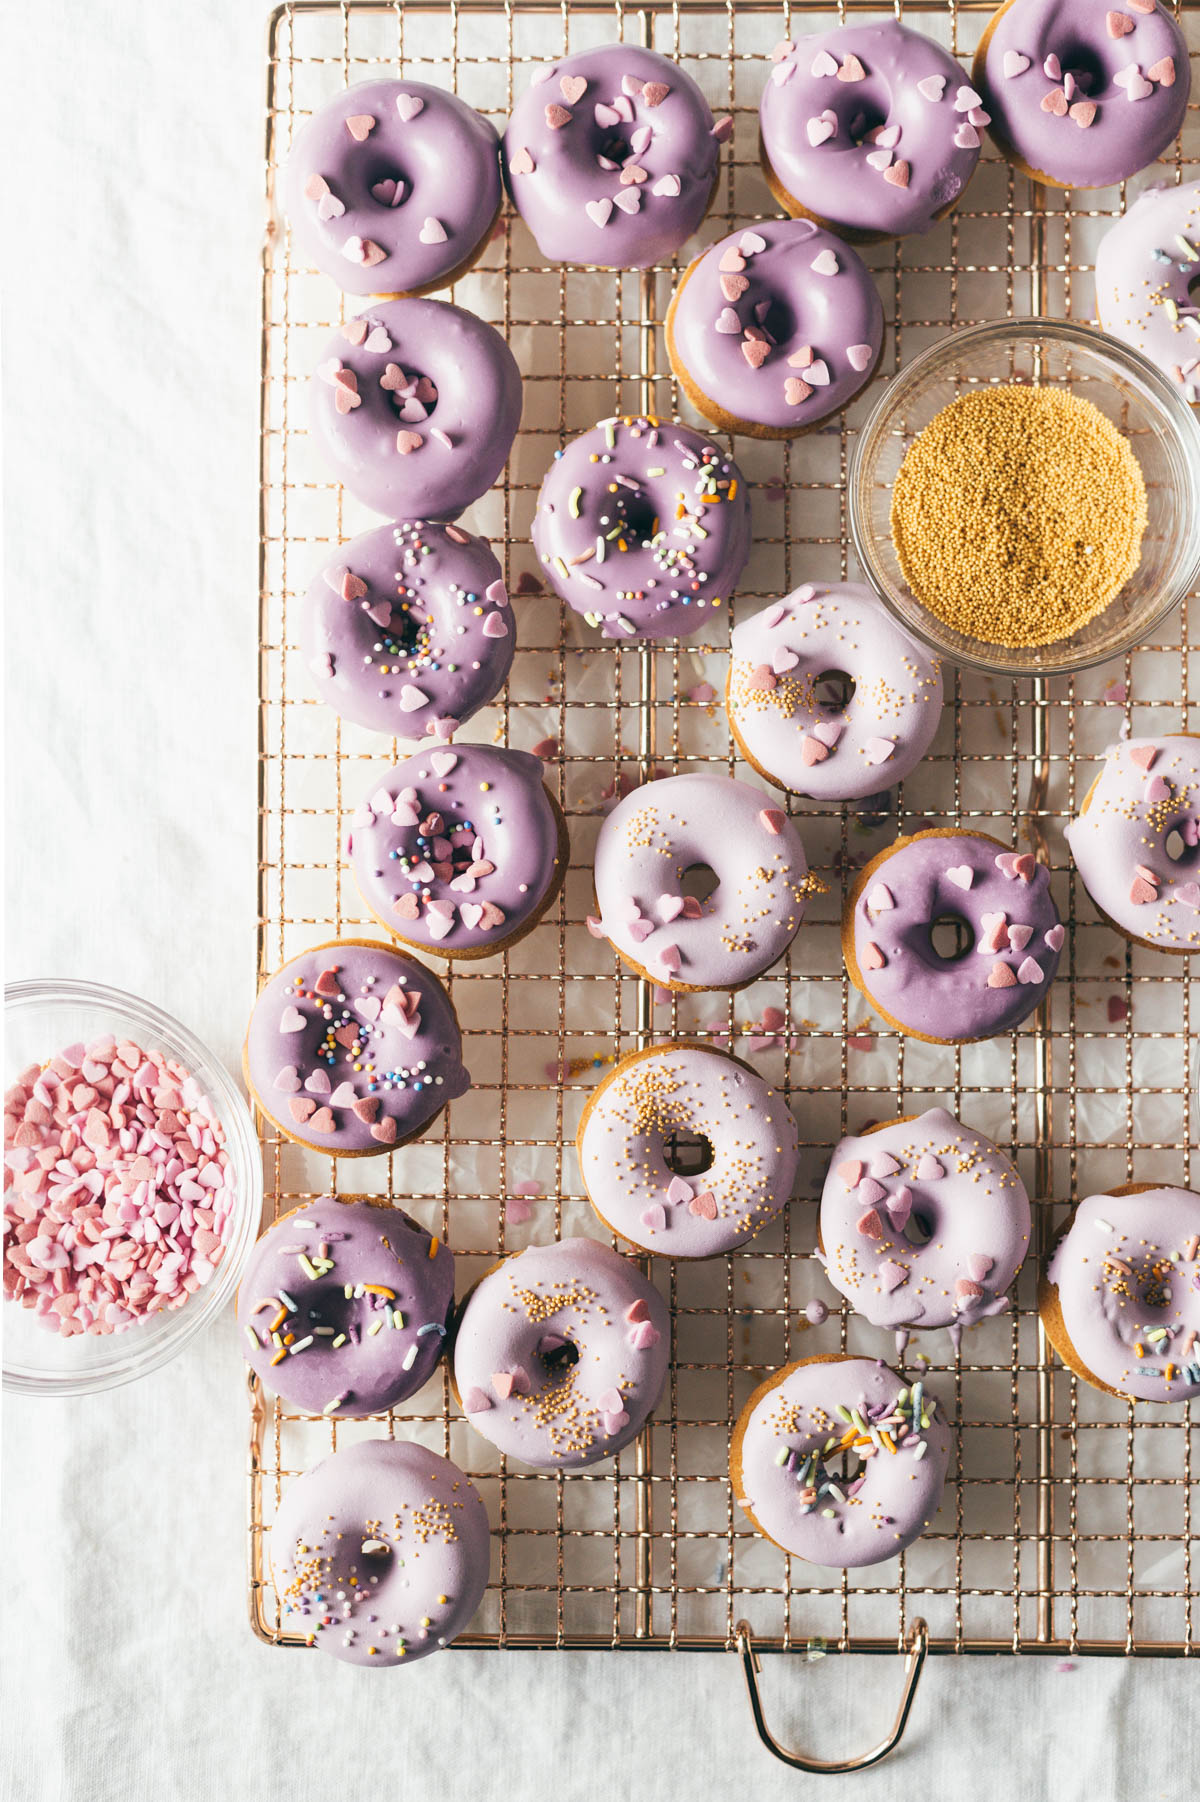 Donut Shop Donuts, Filling, and Icings/Glazes Recipe 